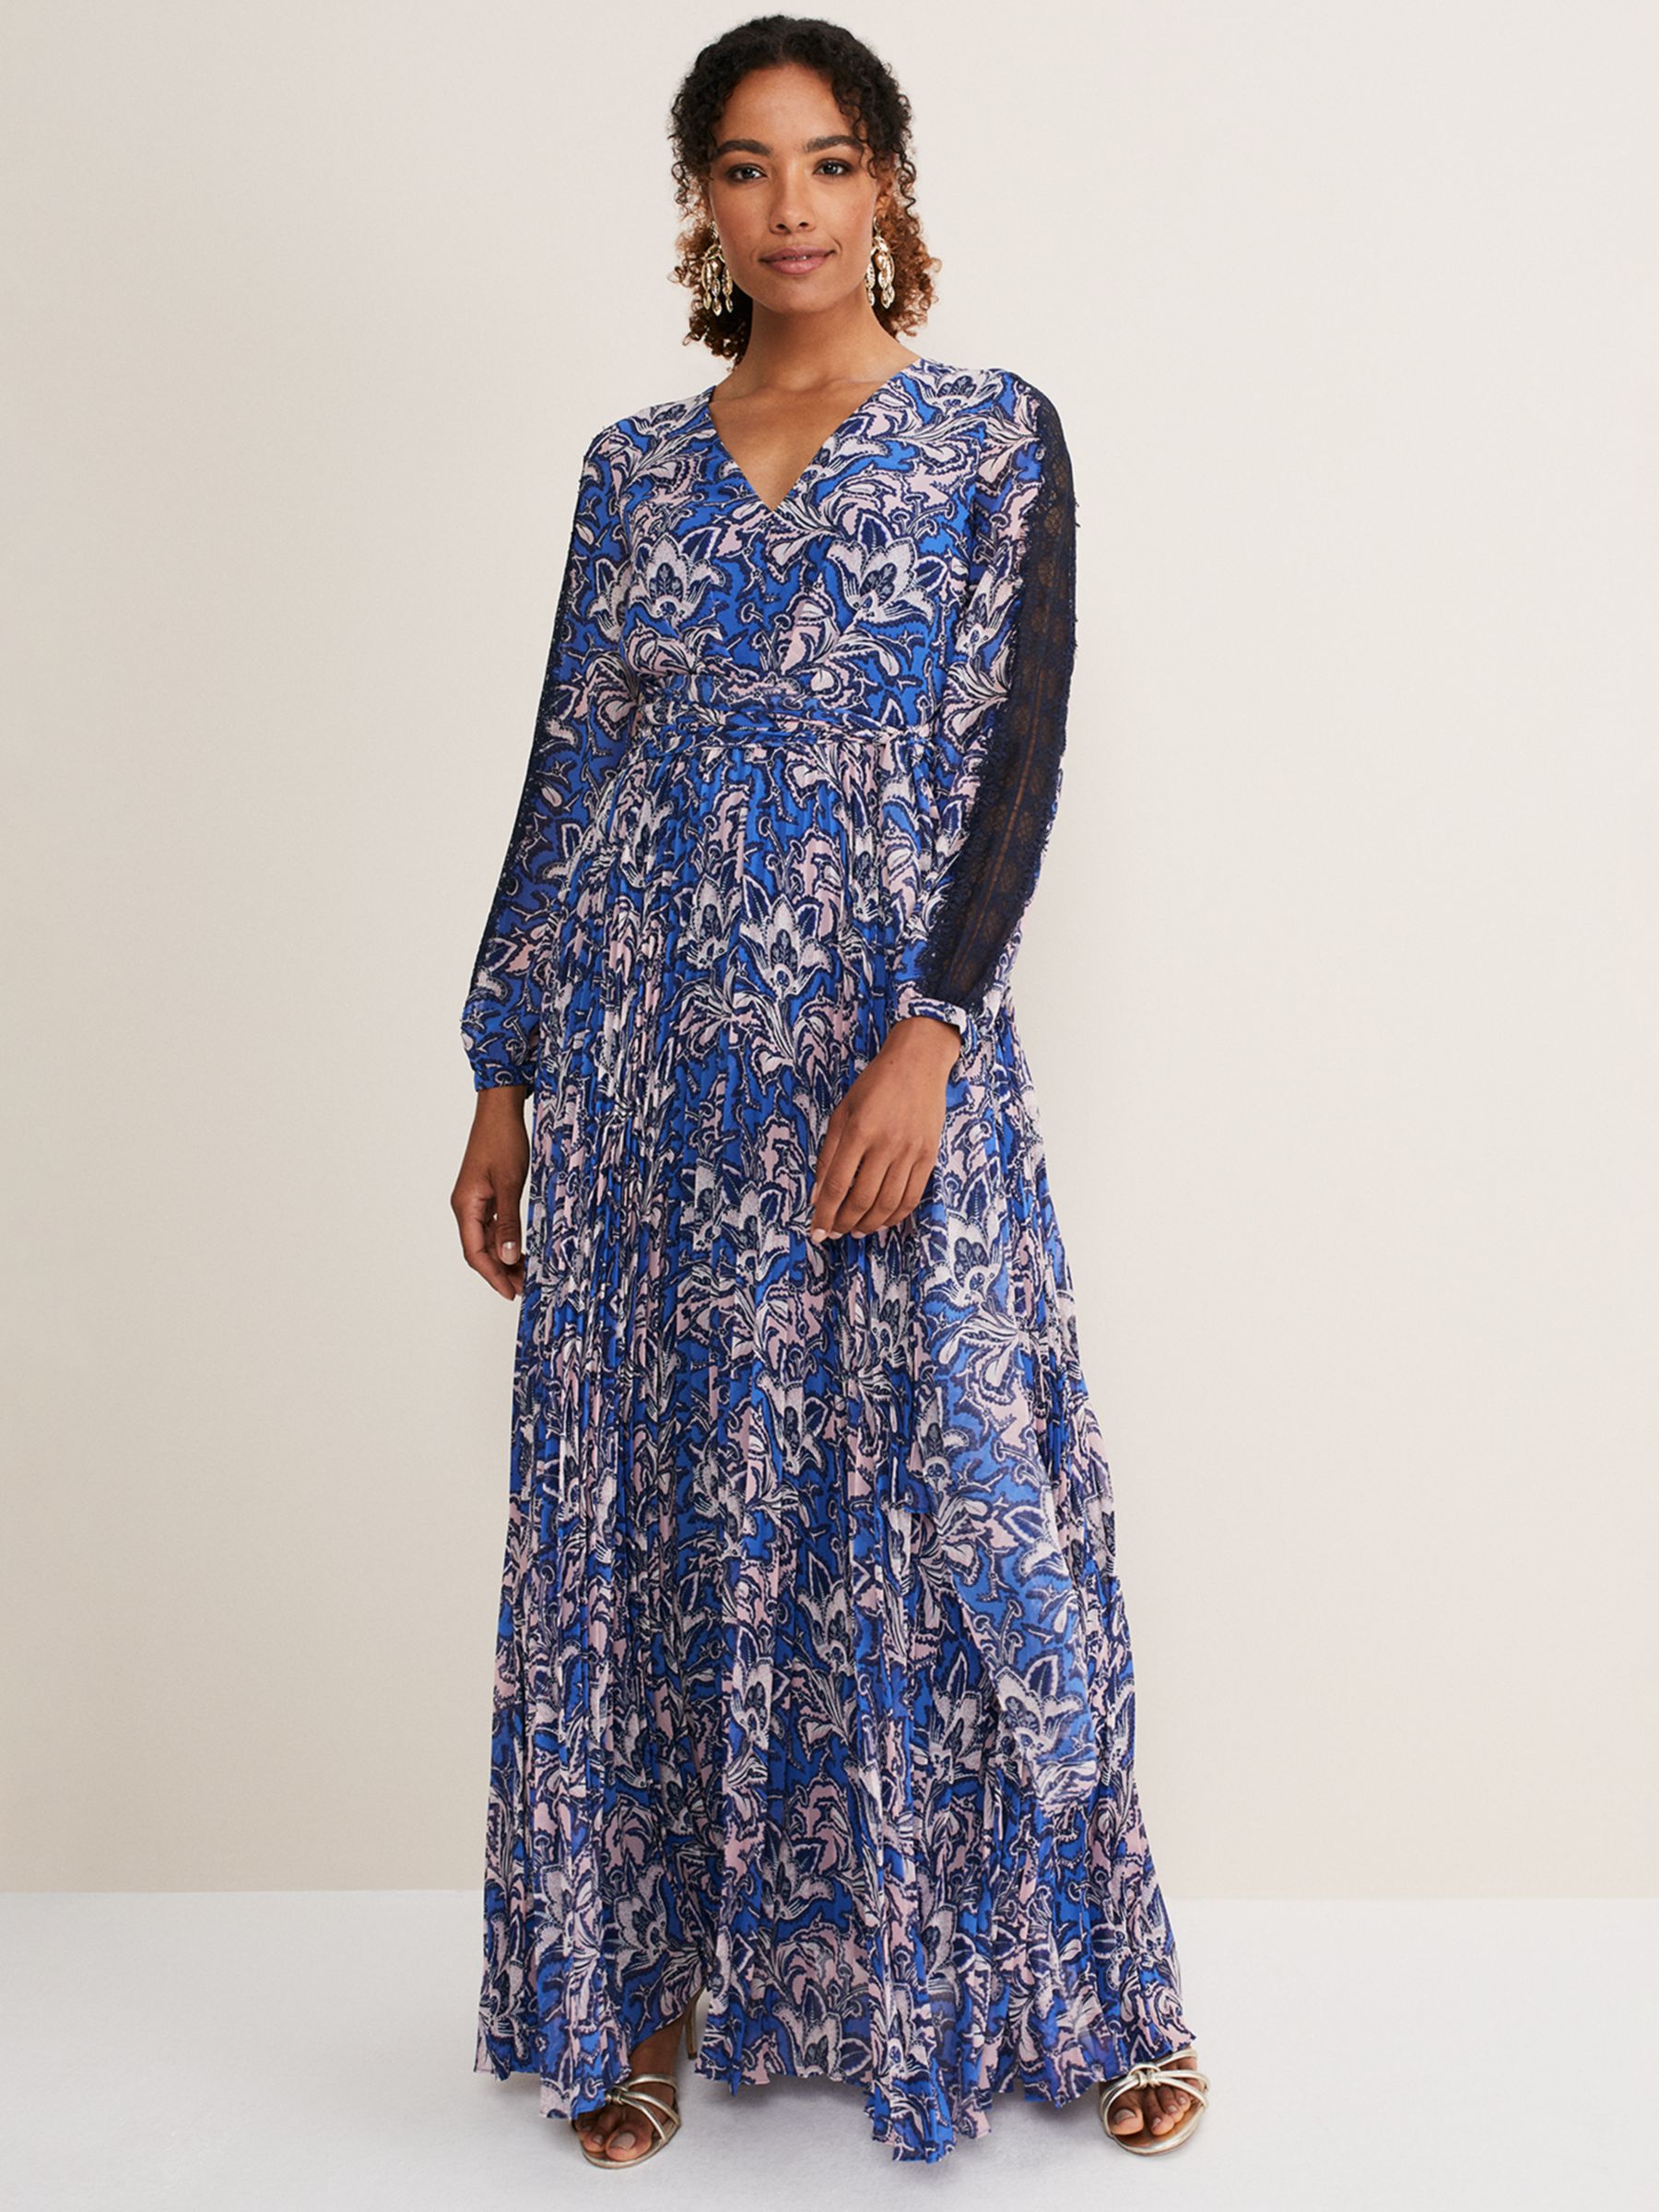 Phase Eight Claudia Floral Maxi Dress, Blue/Multi, 6